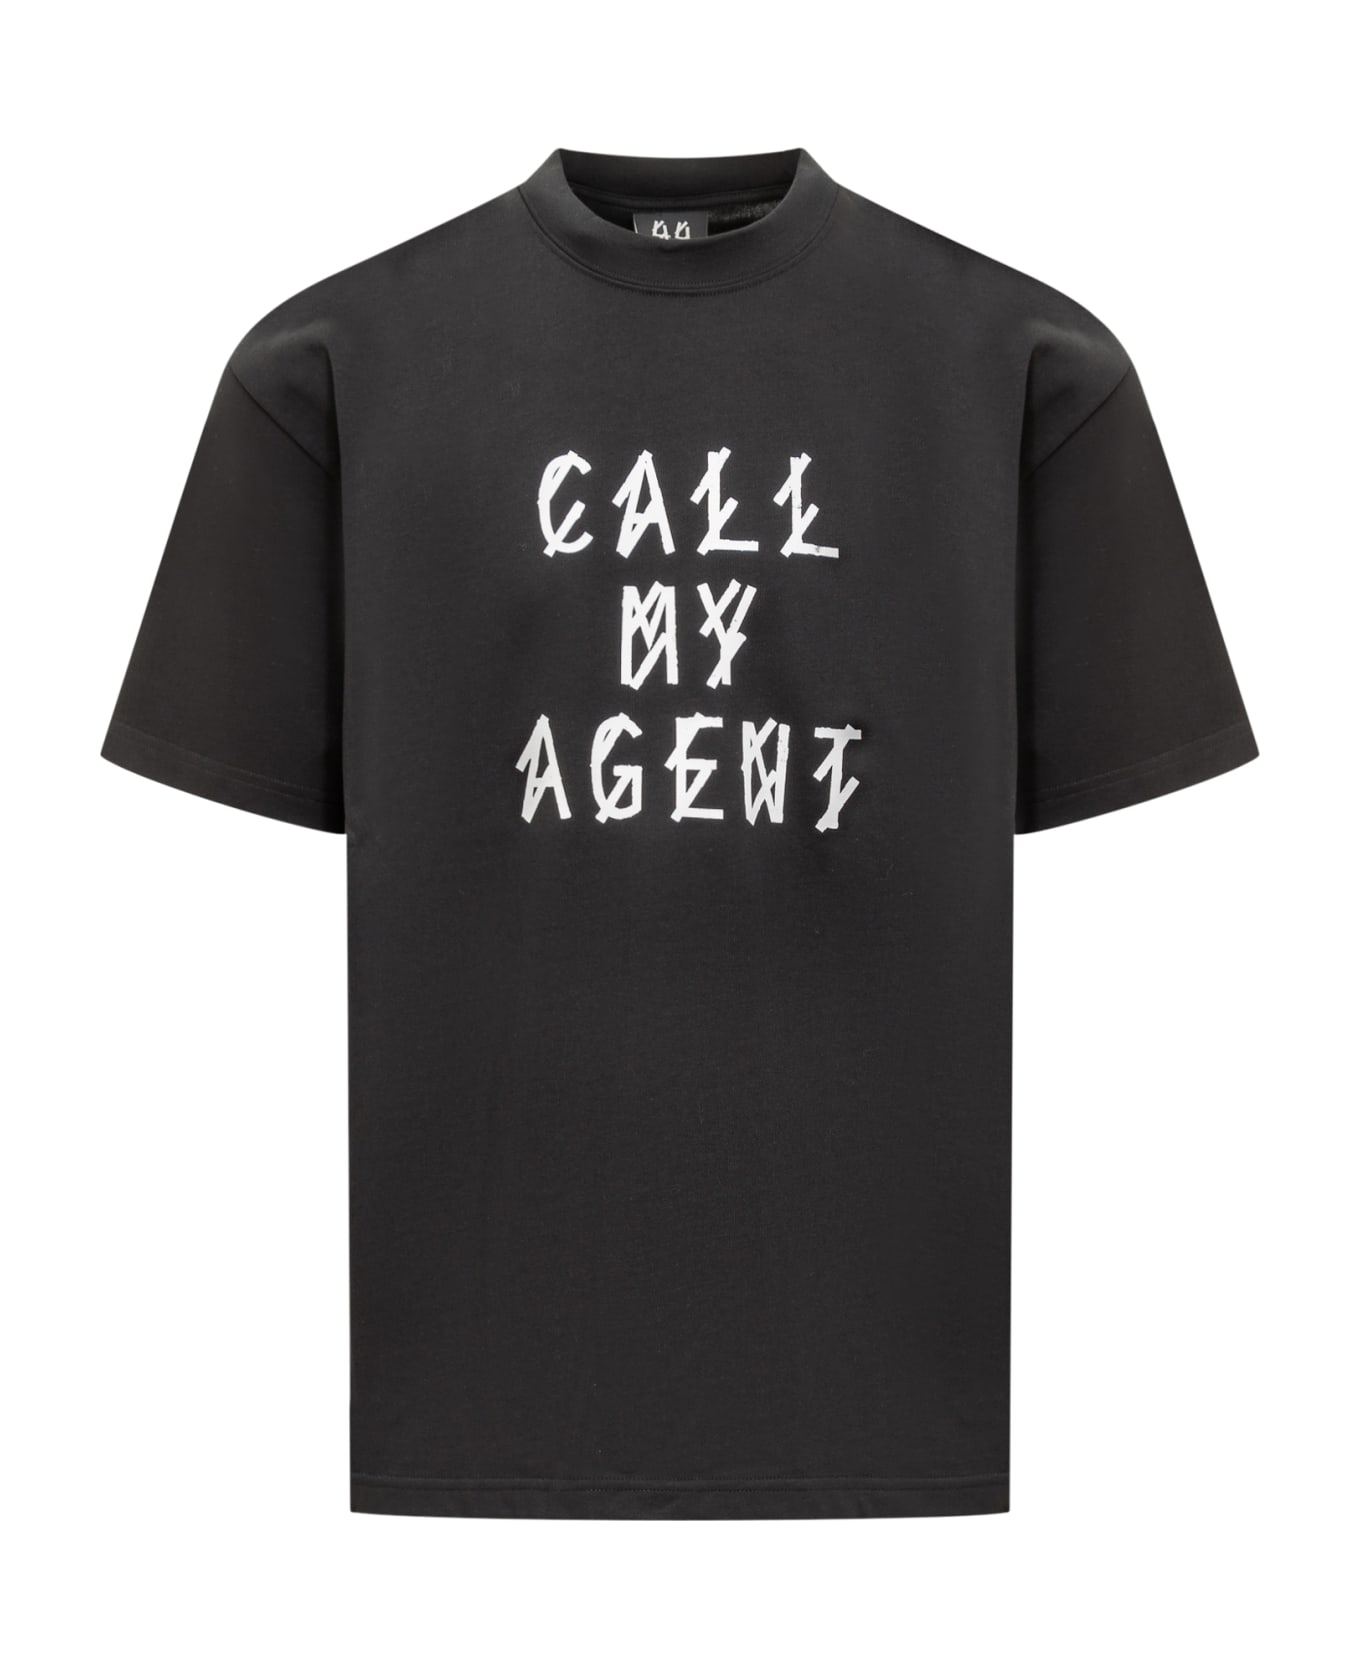 44 Label Group T-shirt With My Agent Print - BLACK-CALL MY AGENT シャツ